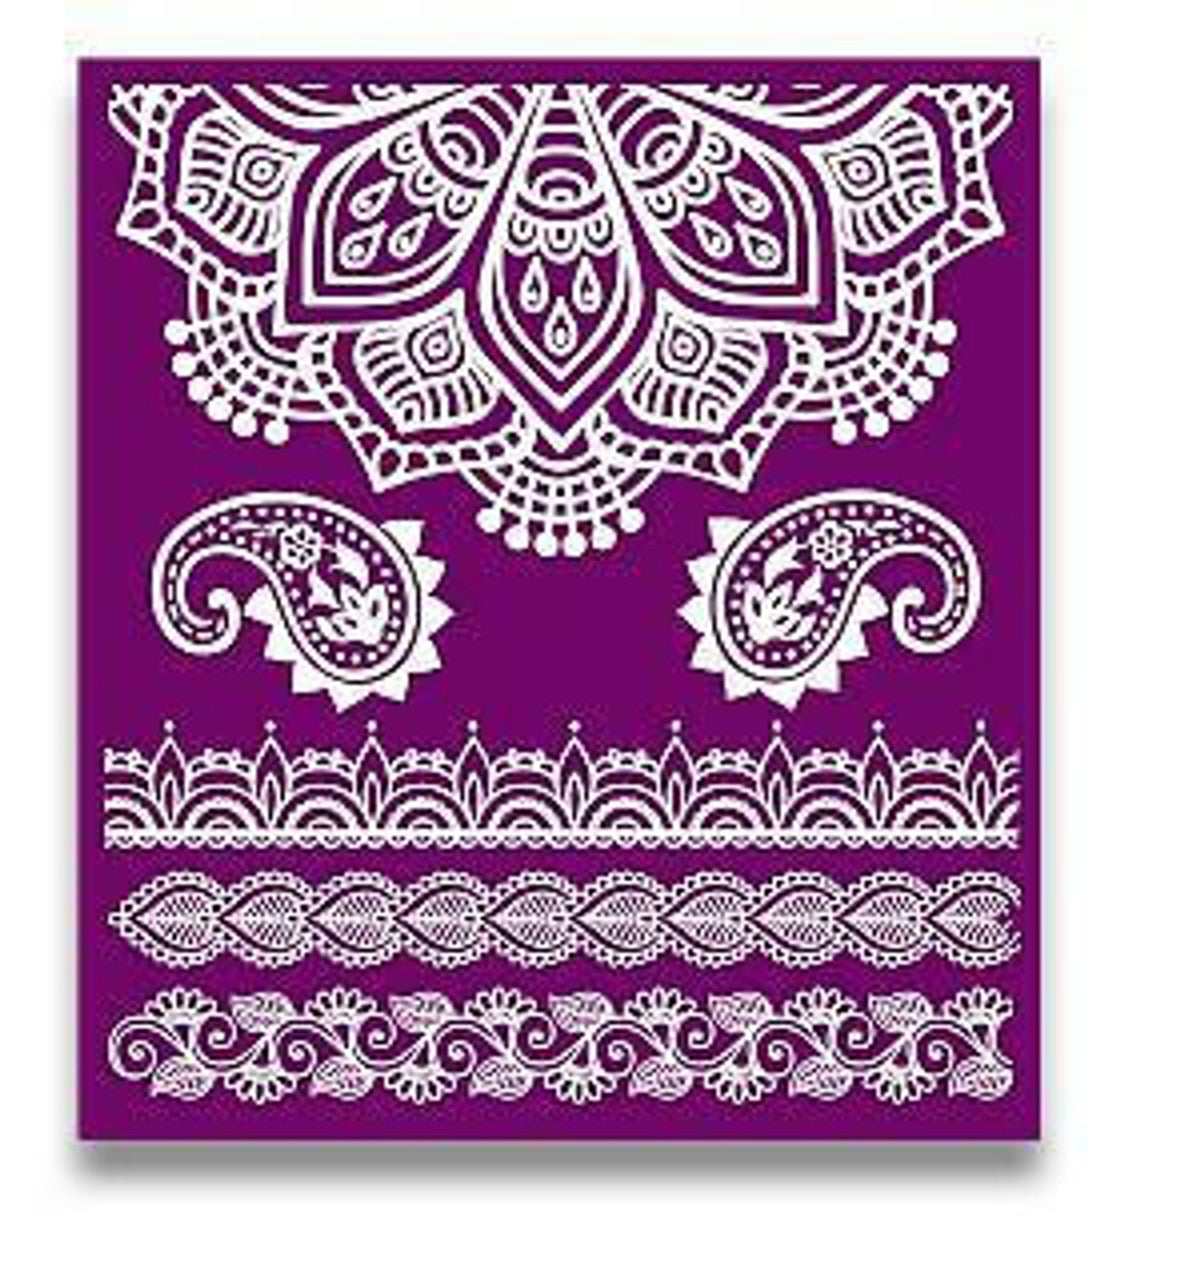 MANDALA Silk Screen Stencils 3 designs 8" x 10" by Belles and Whistles